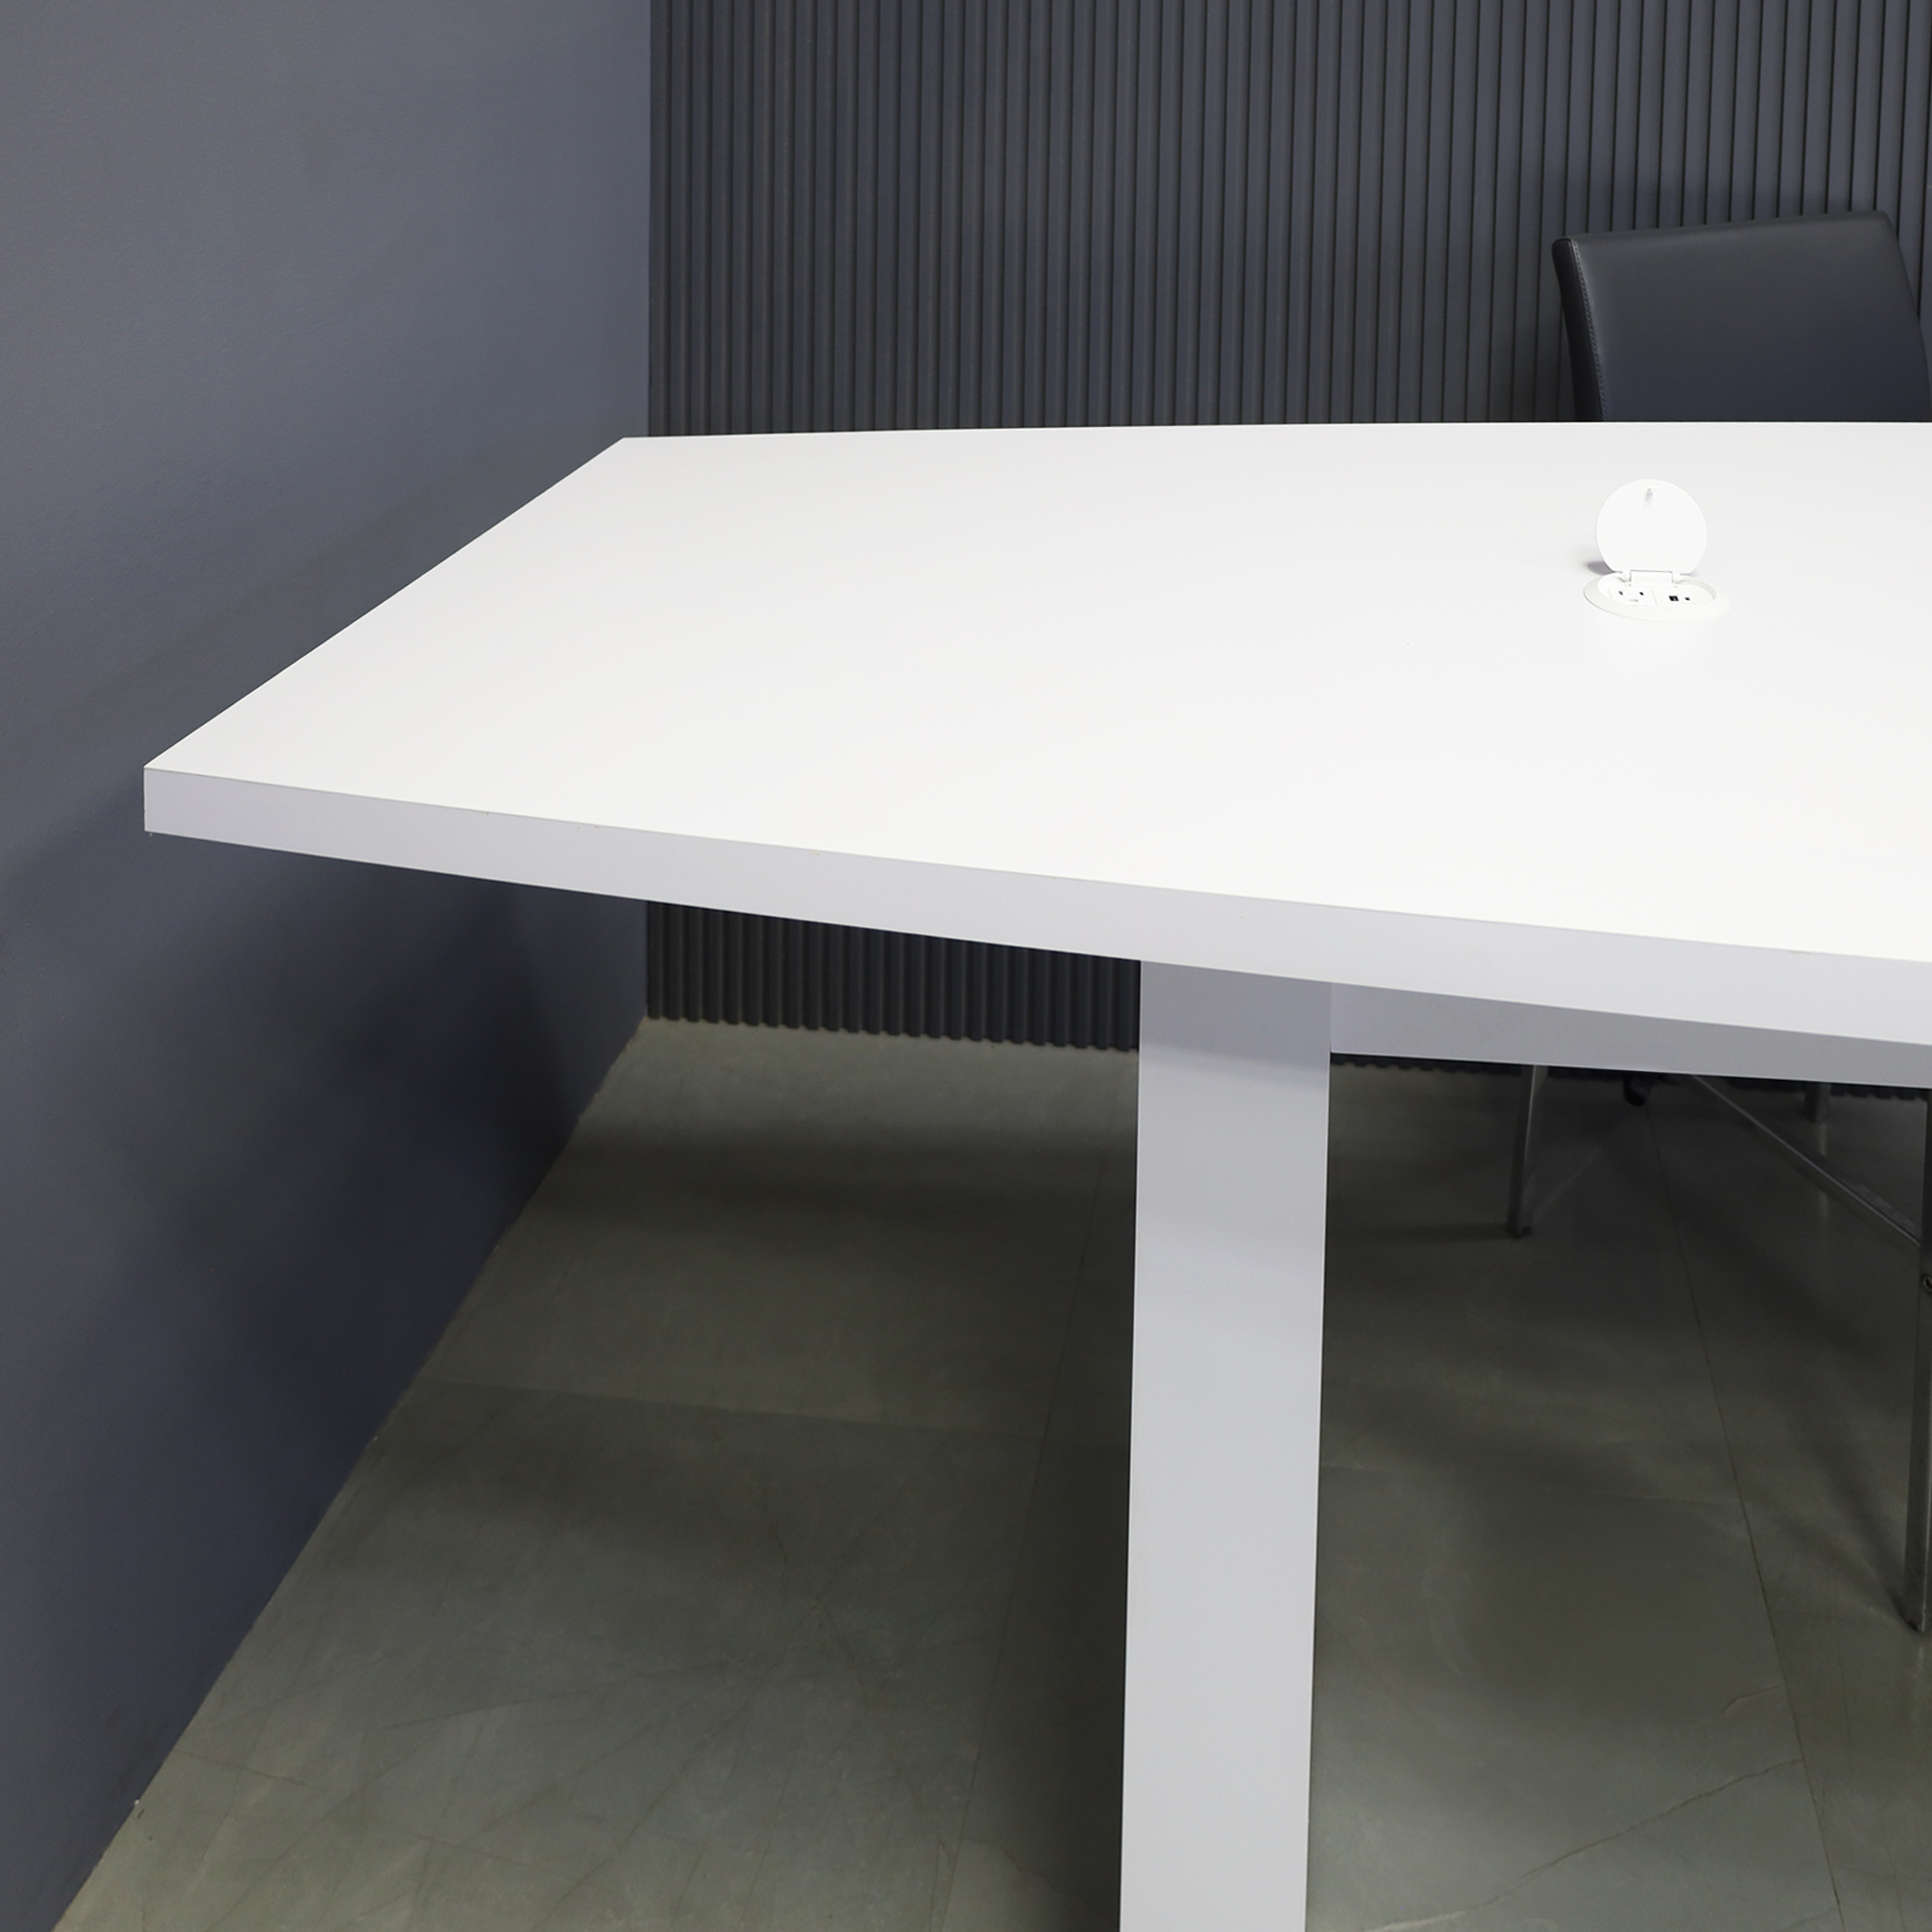 132-inch Counter Height Collaboration and Huddle Table in white matte laminate top and base with MX1 powerboxes shown here.